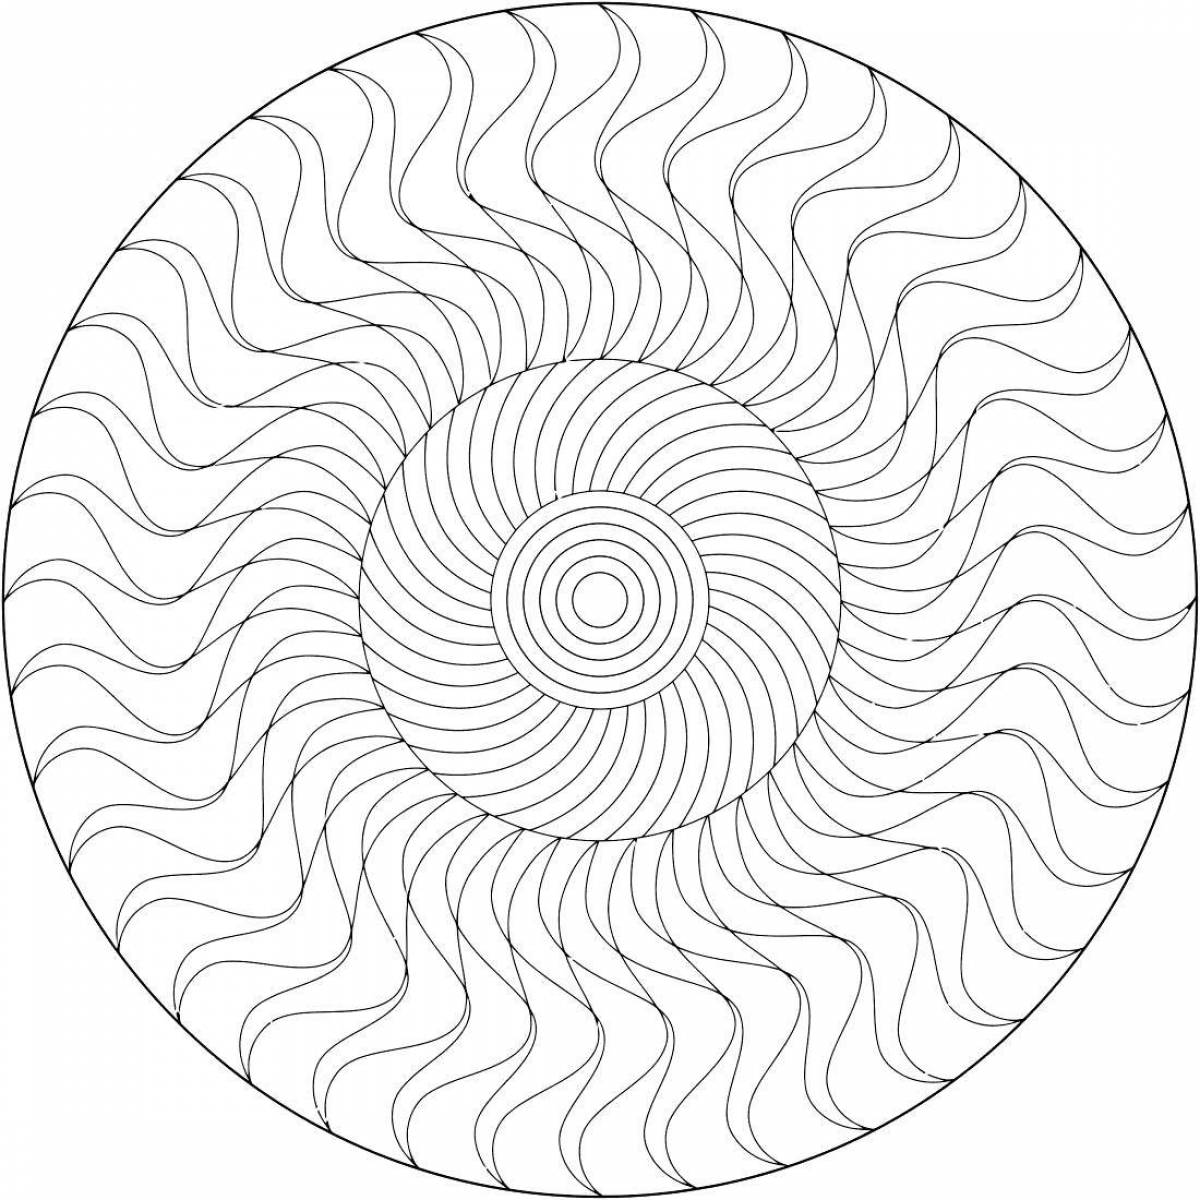 Coloring page magical spiral pattern